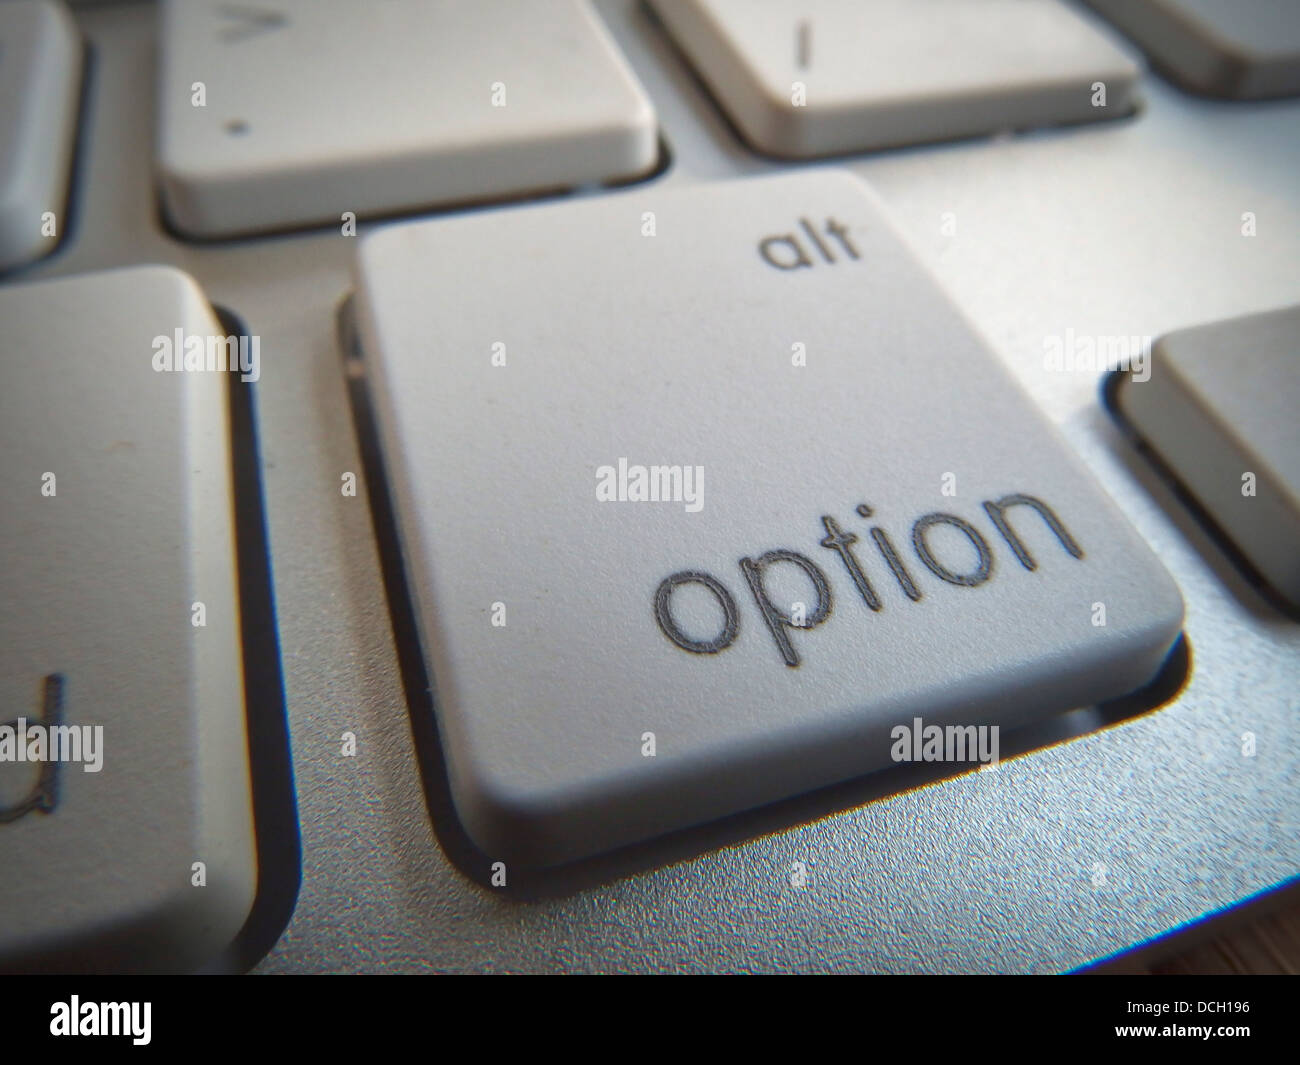 Keyboard, option buttons Stock Photo